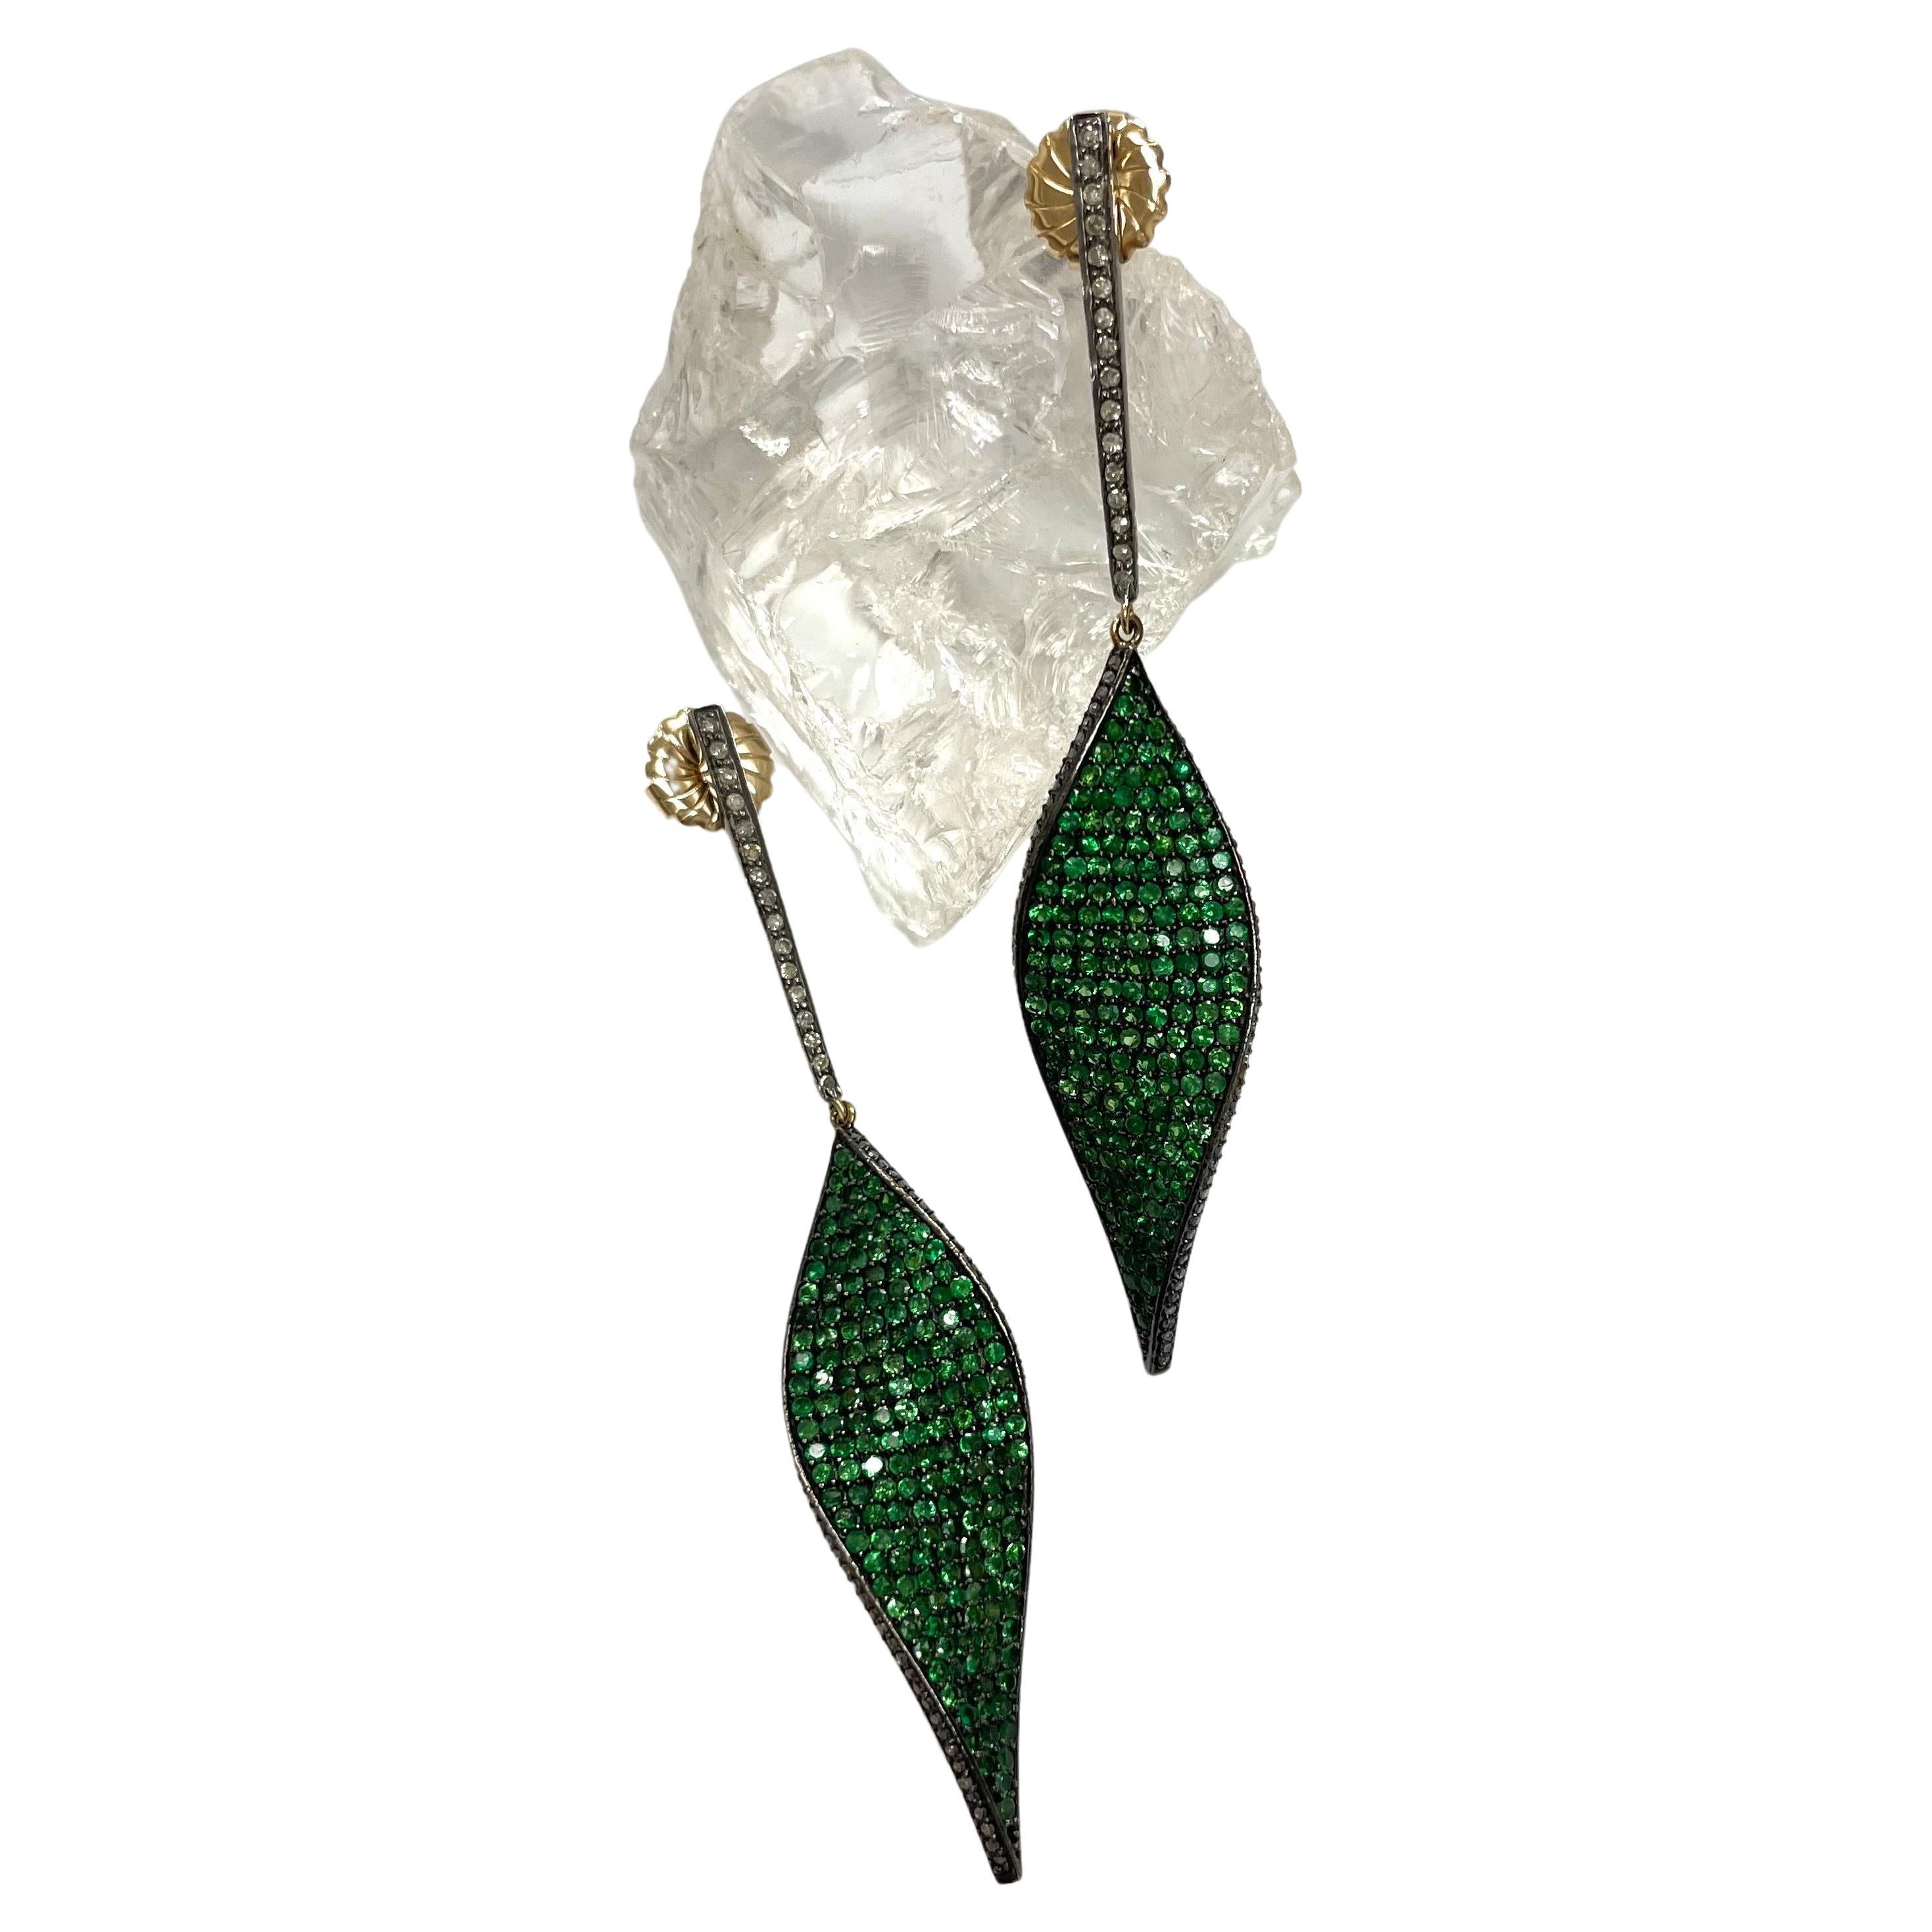 Description
Vibrant green, rare pave Tsavorite Garnets in a unique slight twist leaf shape, framed with pave diamonds.
Item #E3114. Check out matching Necklace (see photos), Item # N3817 ($6,500)
We also suggest a matching ring, check out Item #